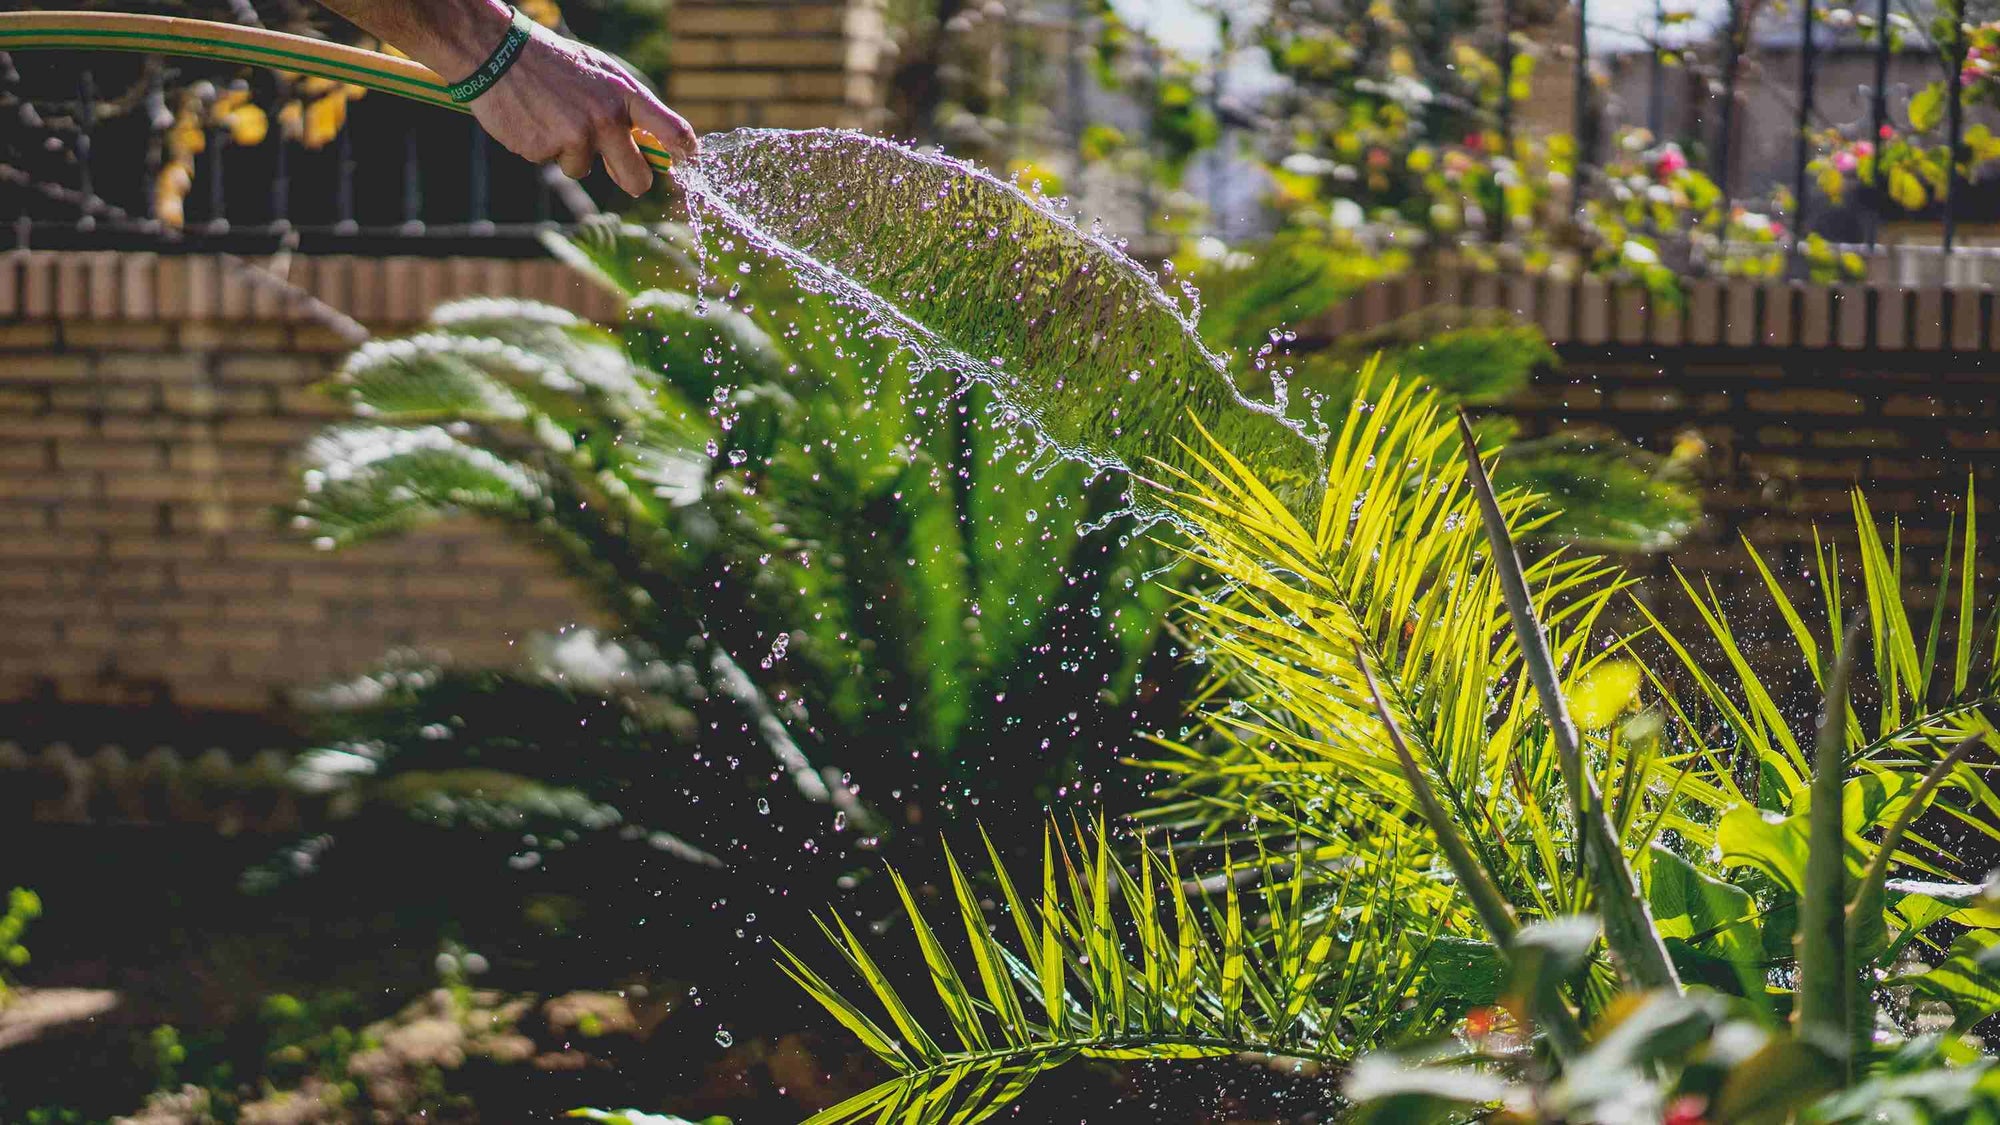 Part of someone's hand holding a hose watering a garden with palm fronds showing